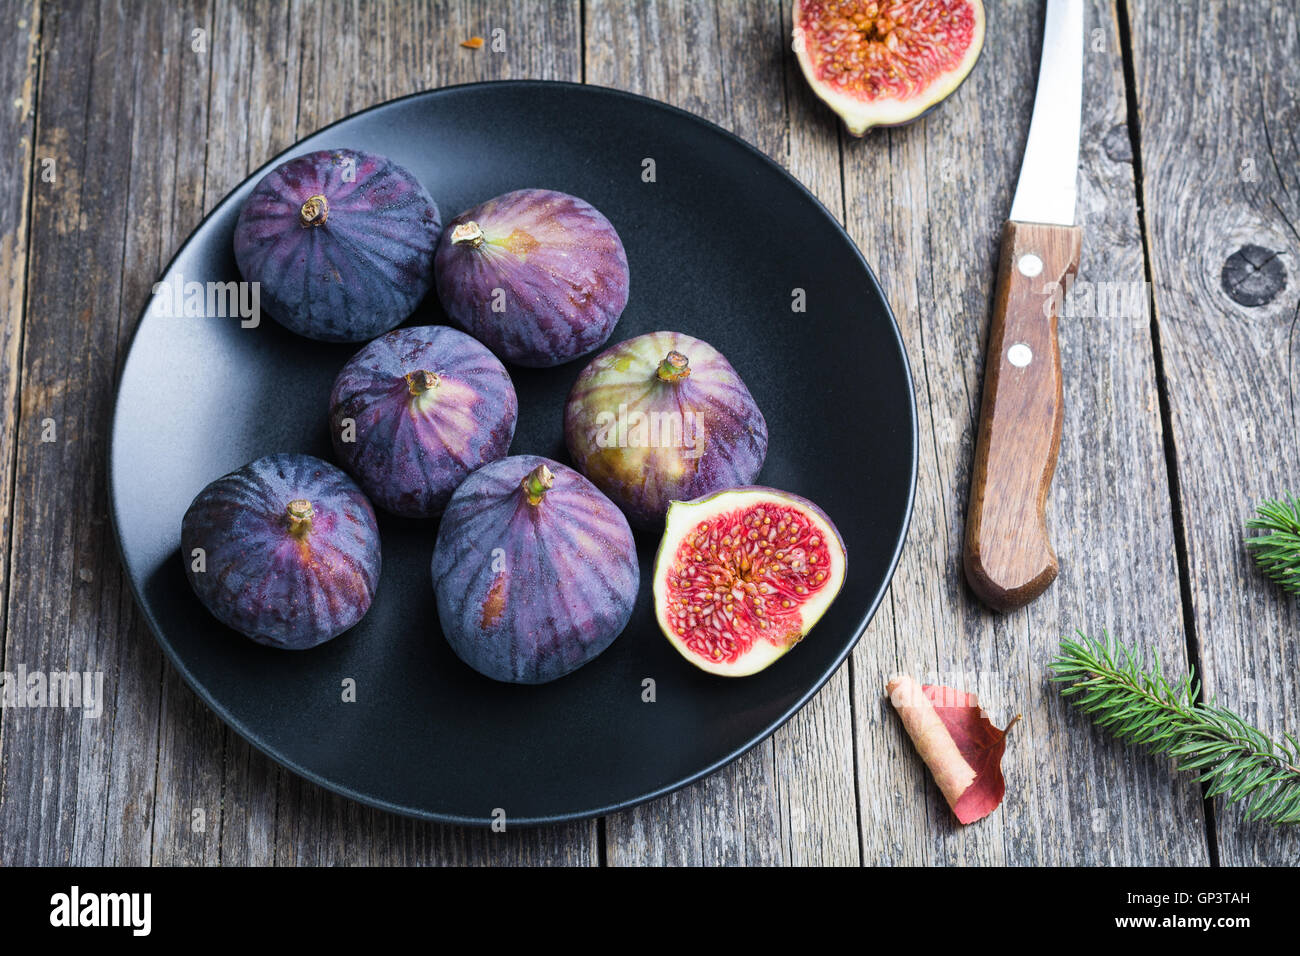 Figs on black plate on wooden table background Stock Photo